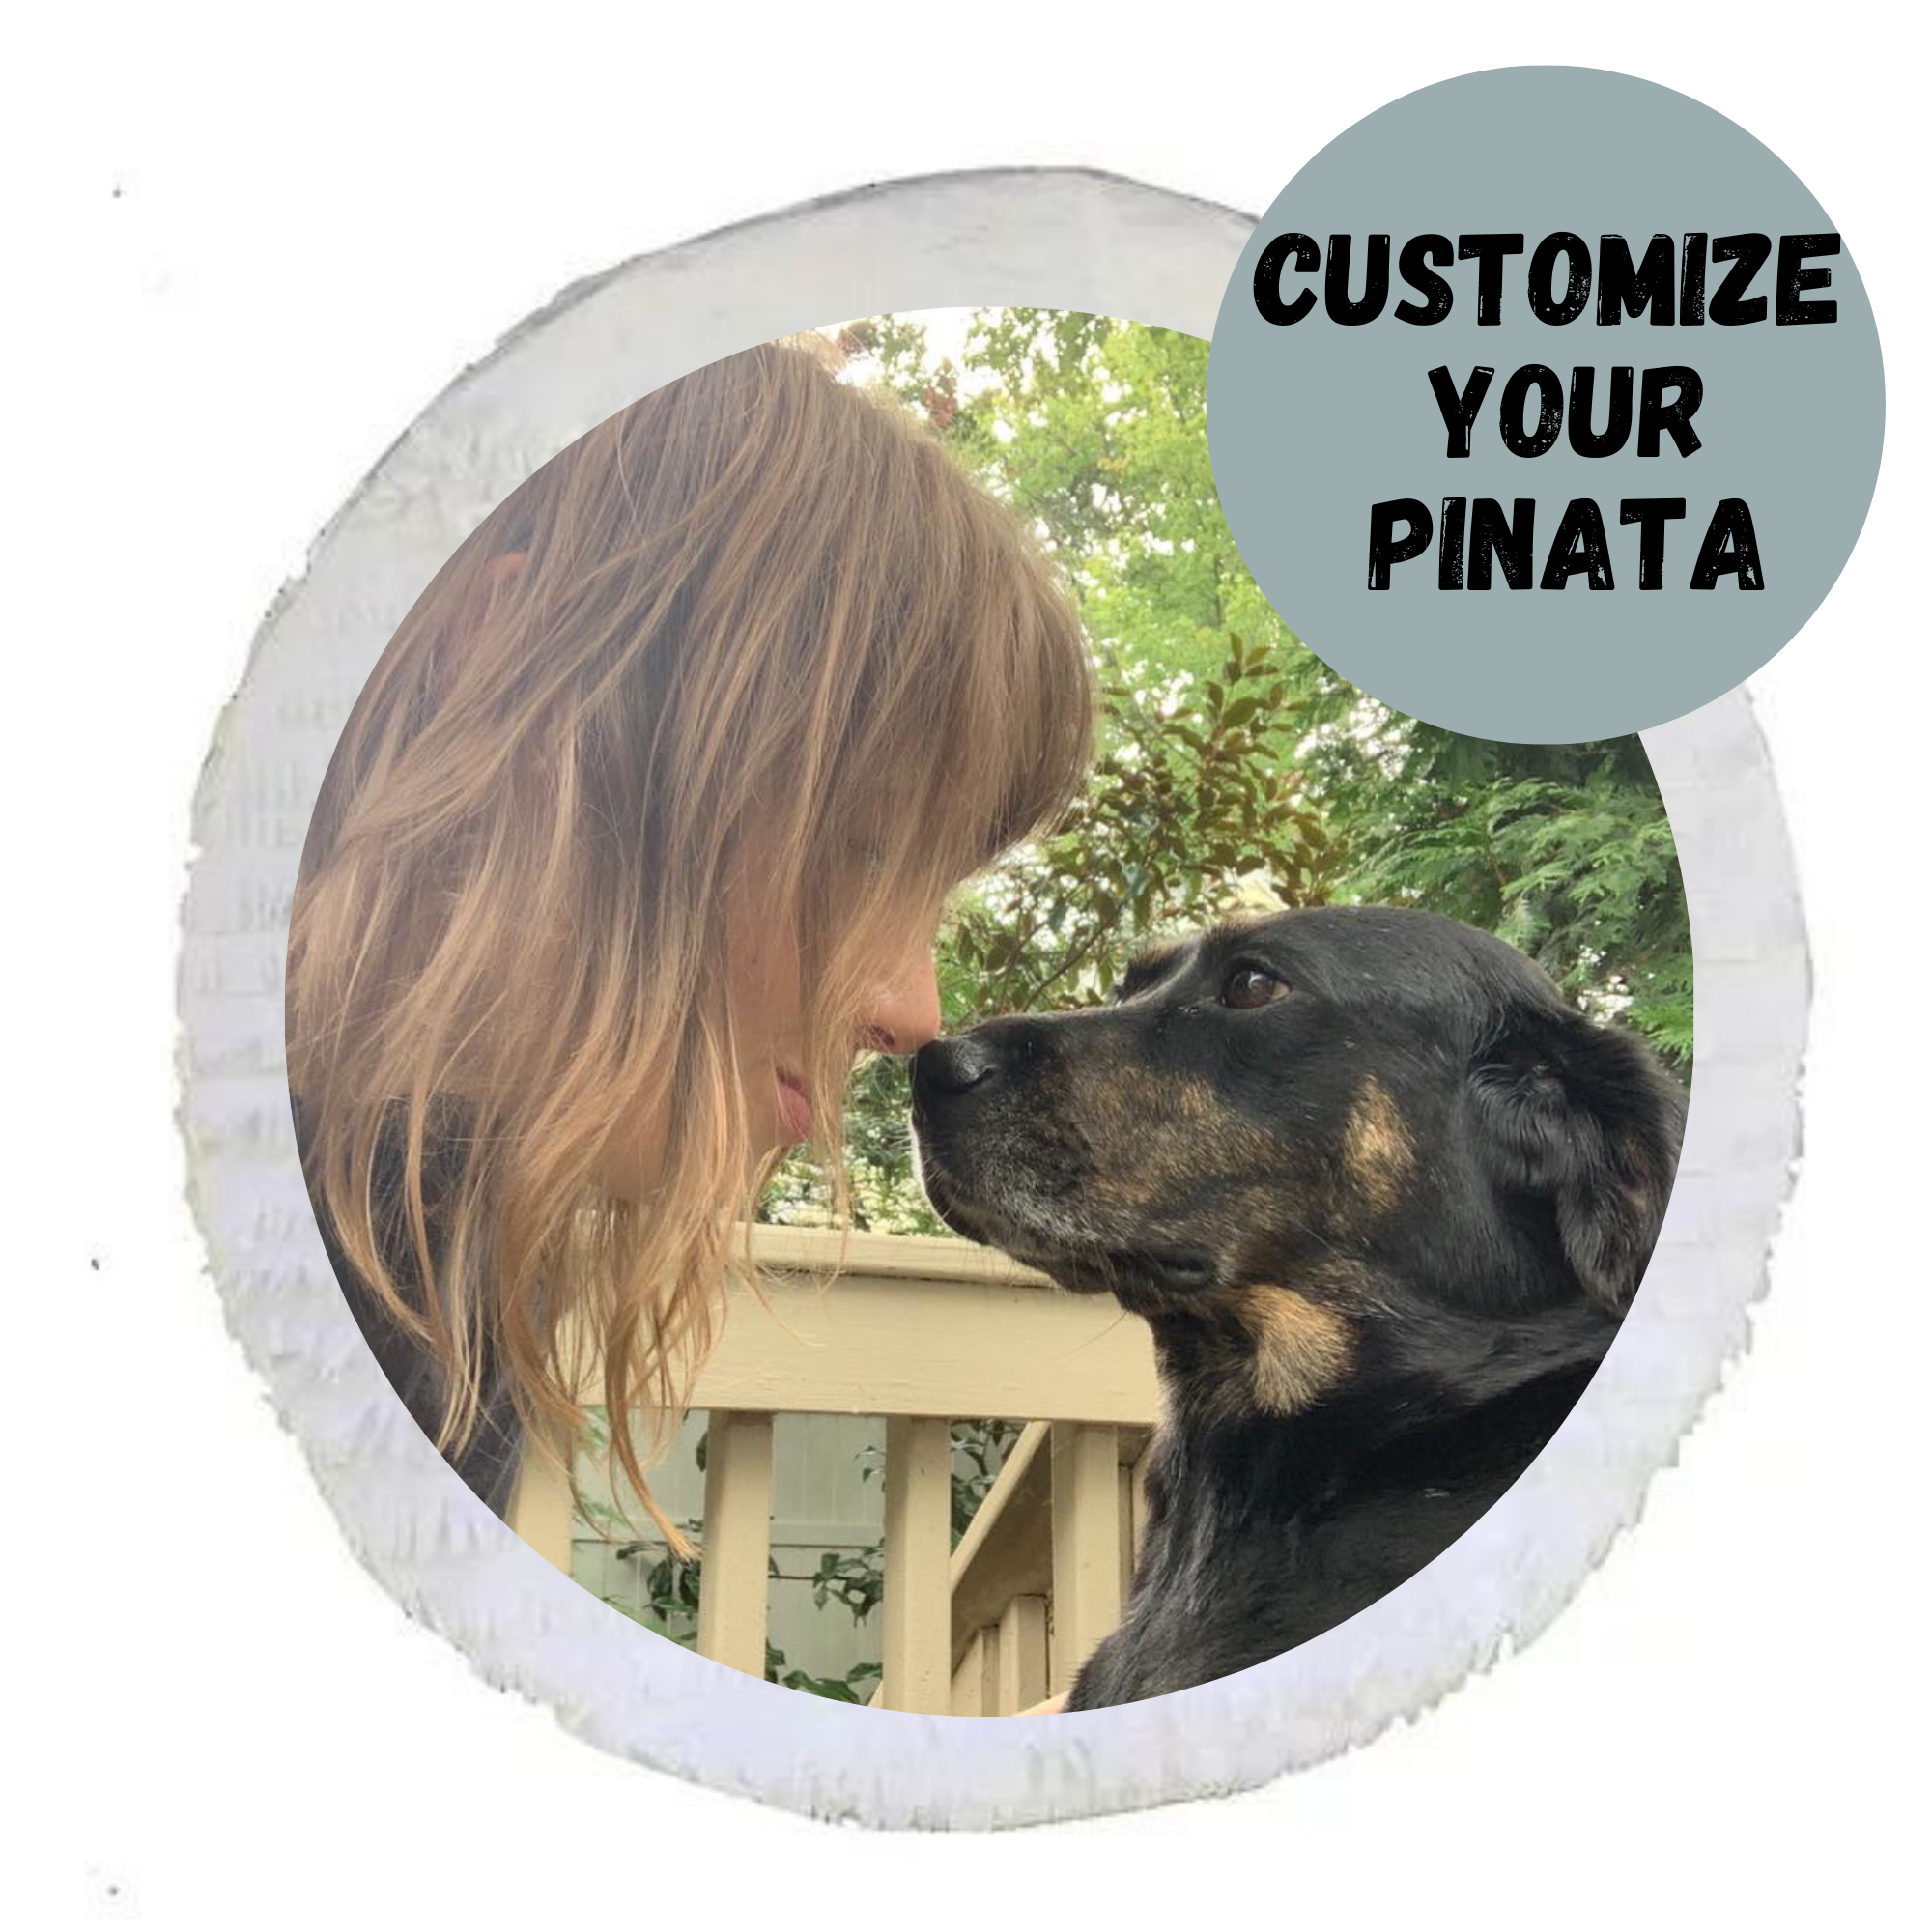 Custom Pinatas - Create Your Own Image - POPPartyballoons